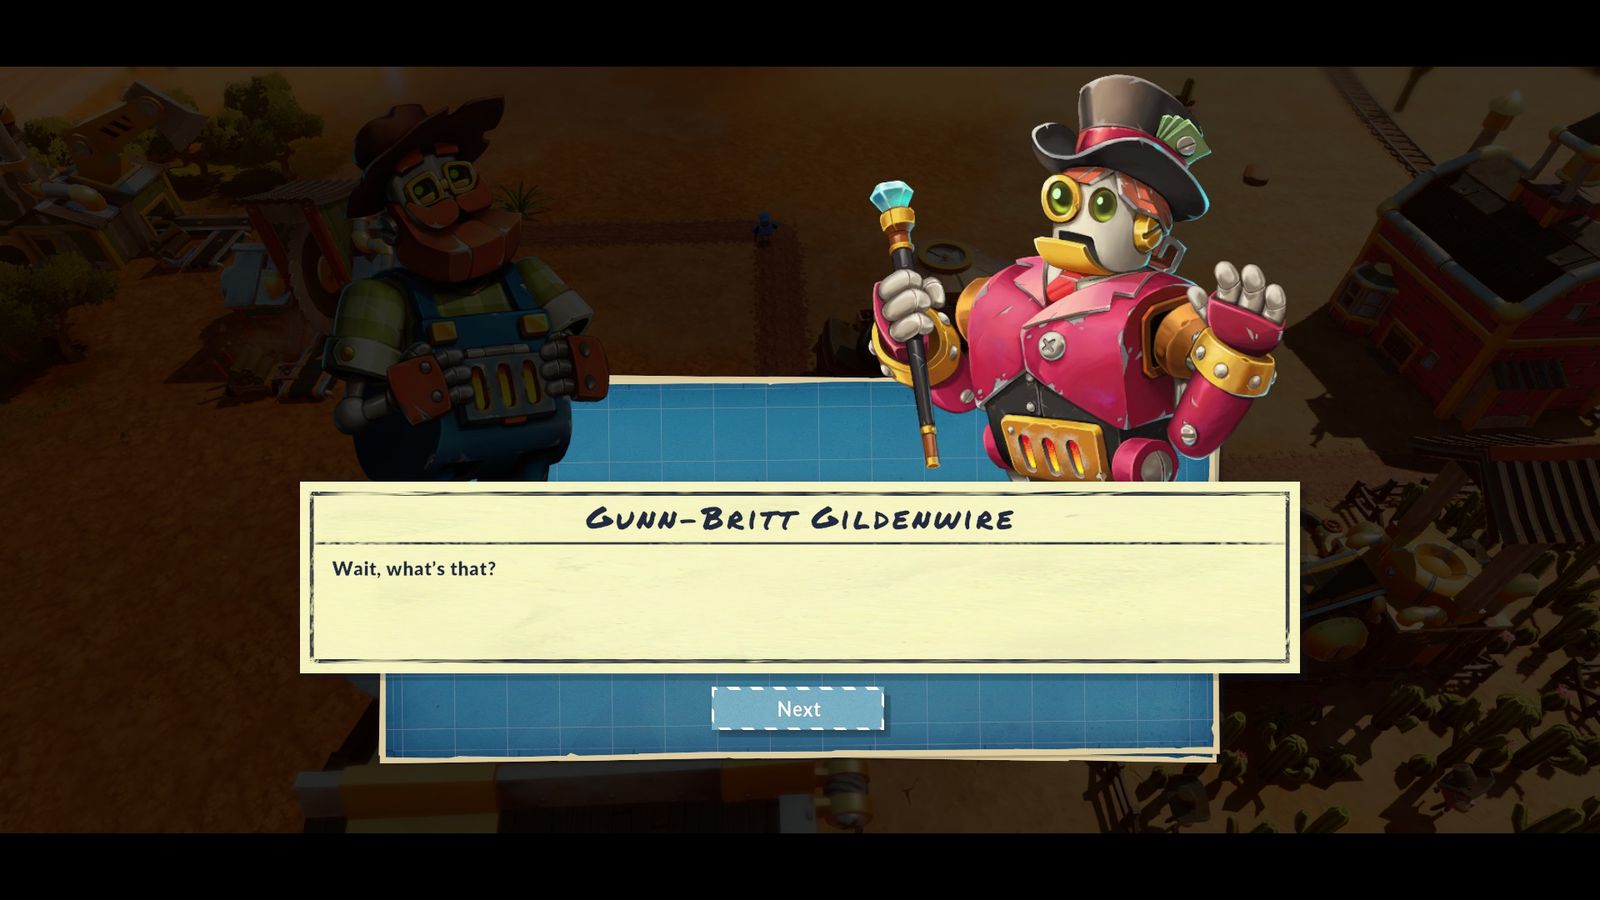 Steamworld Build review - a character saying wait what's that